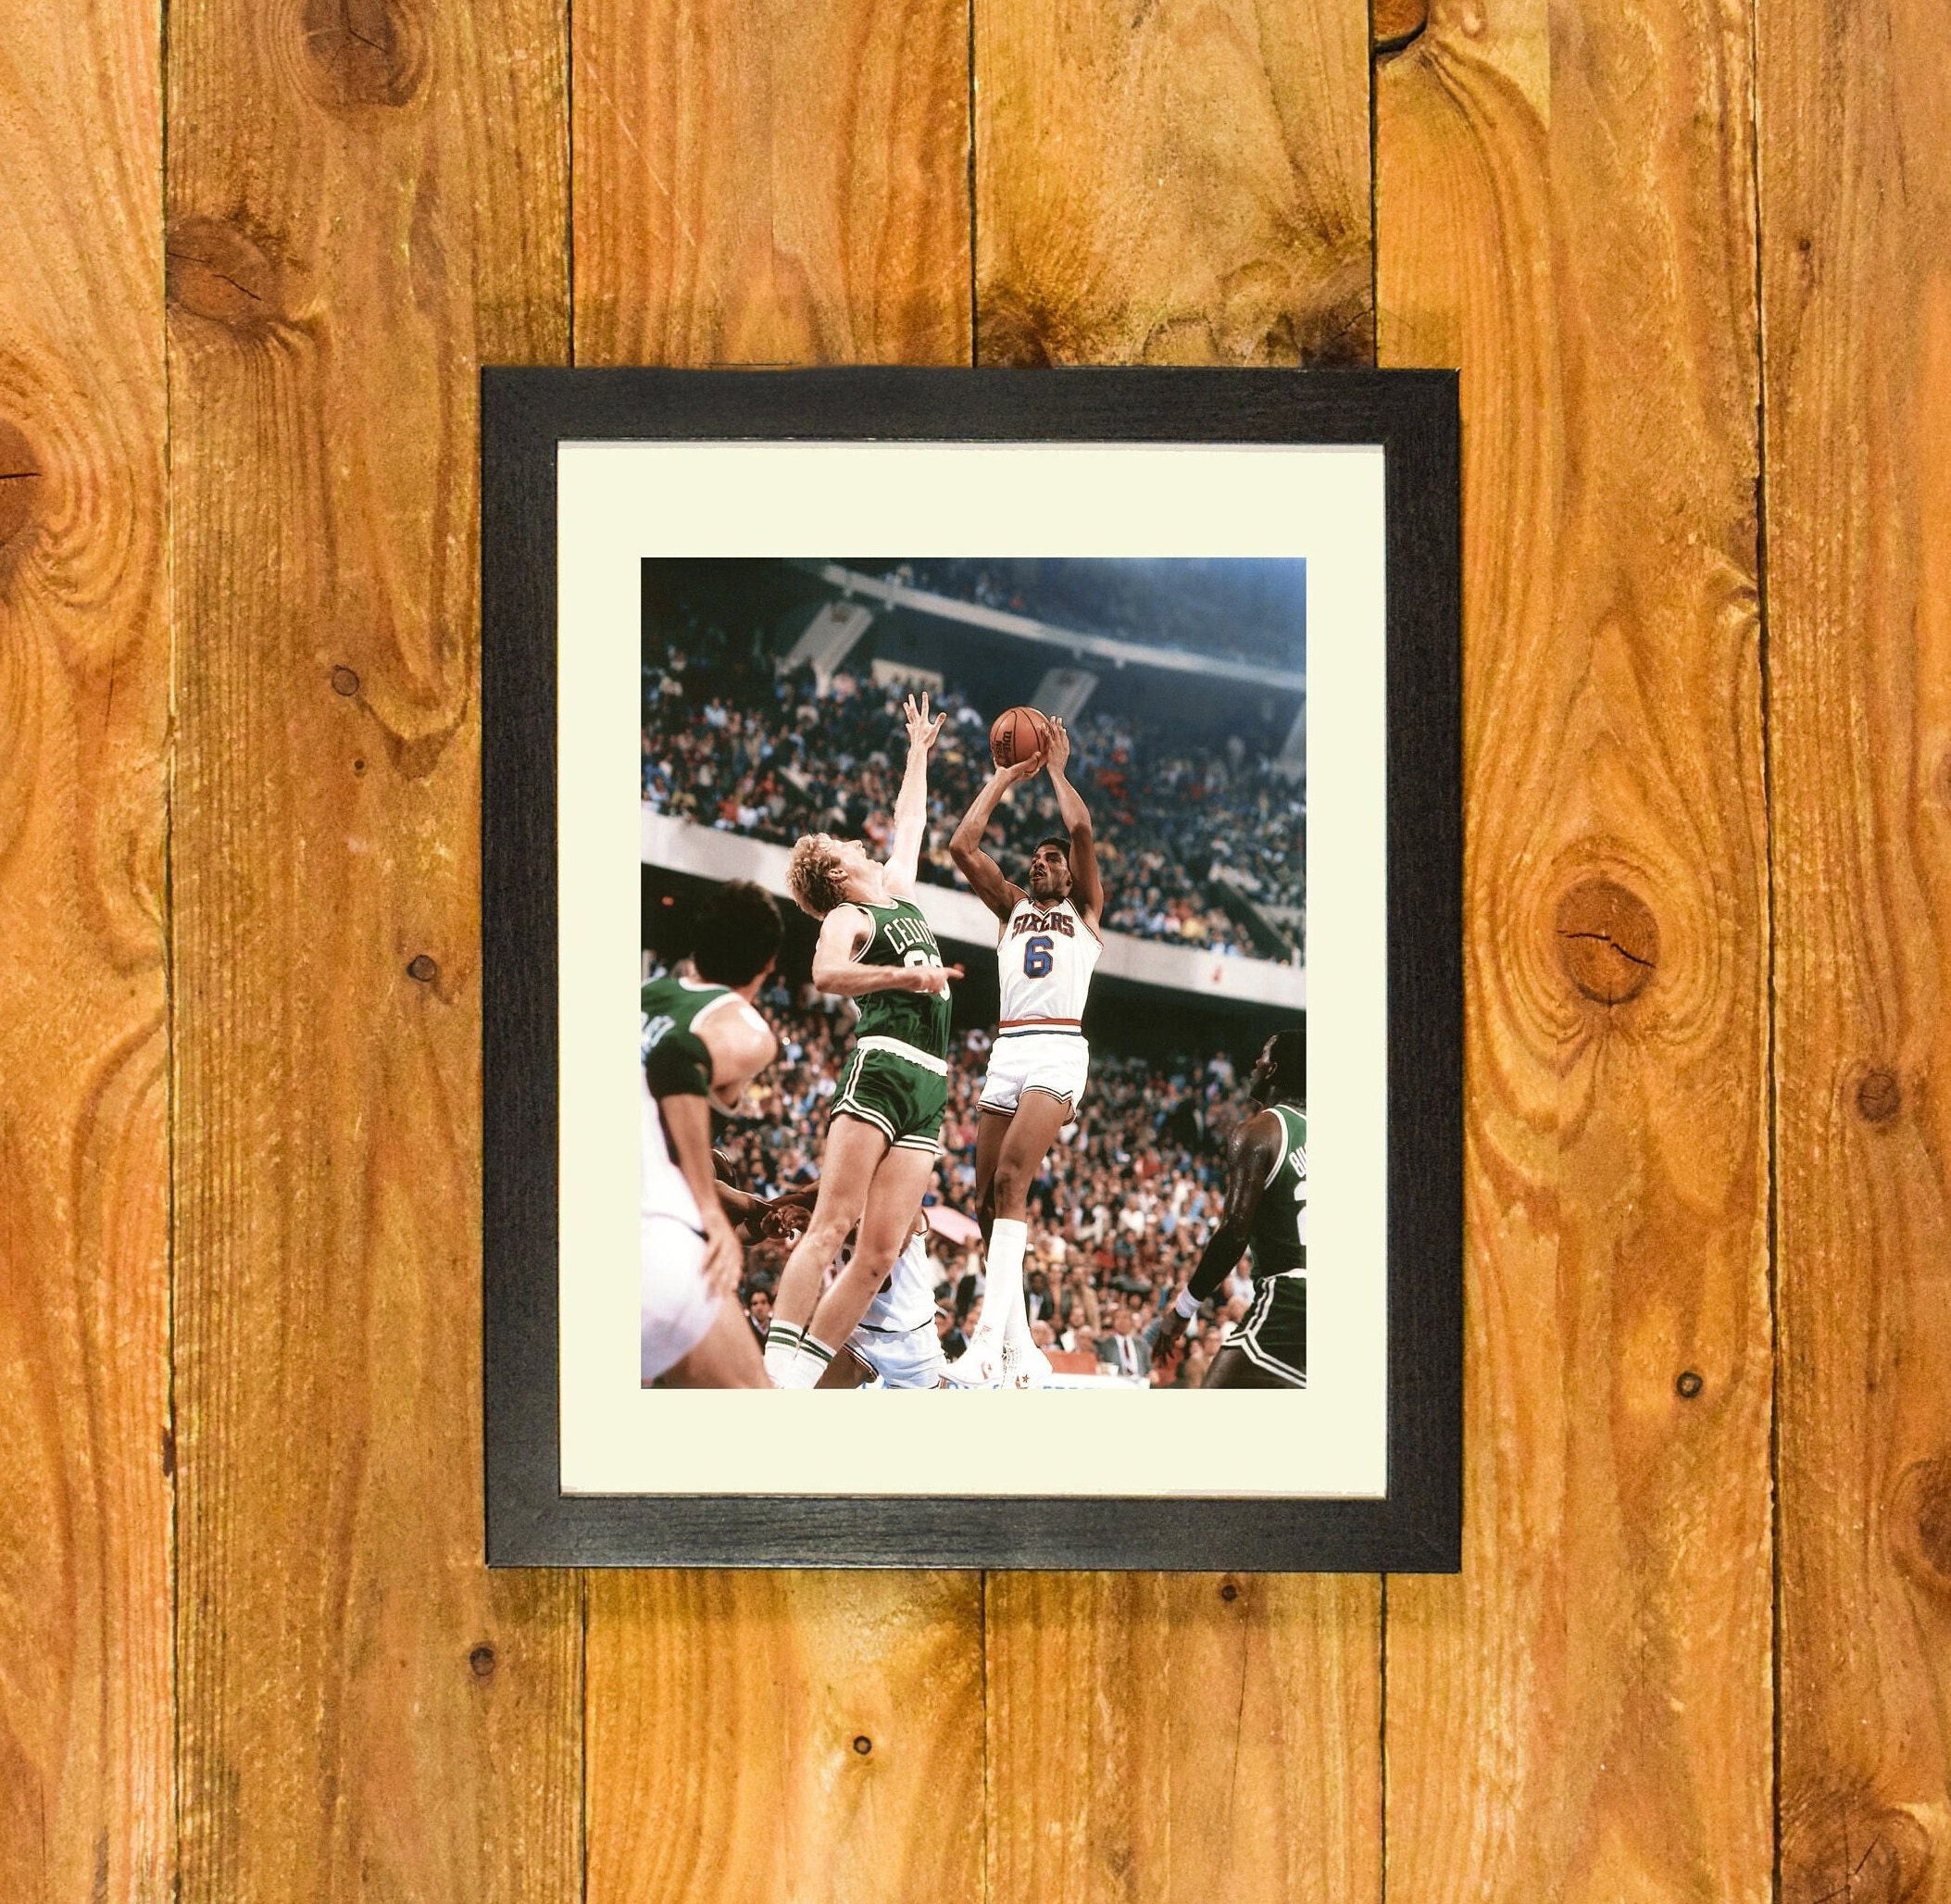 Bob Cousy Red Auerbach signed 16x20 photo framed Celtics 2 mint